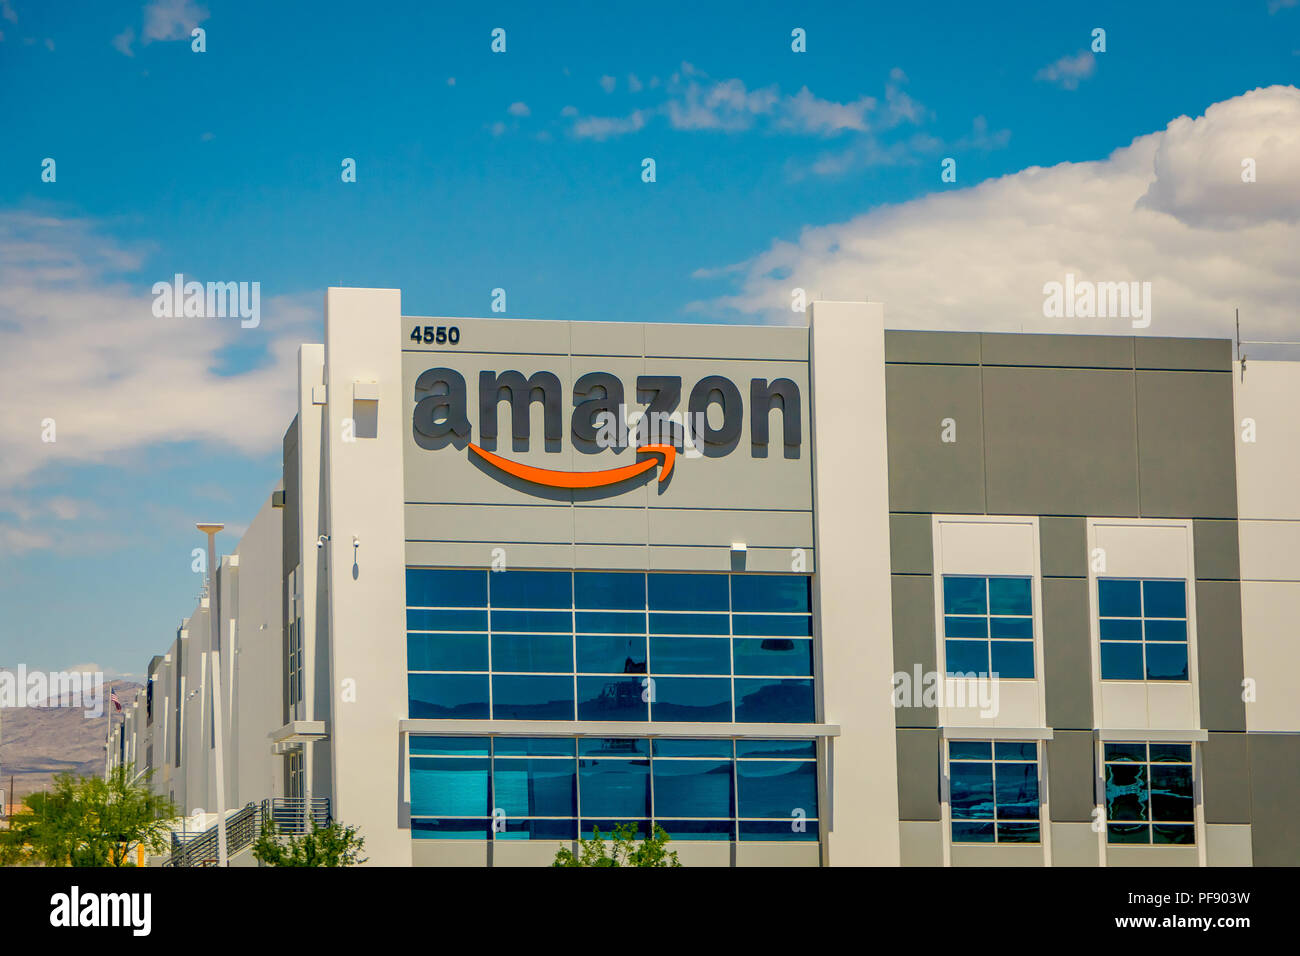 Las Vegas, NV, USA, June 15, 2018: Outdoor view of Amazon building Fulfillment Center. Amazon is the Largest Internet-Based Retailer in the United States Stock Photo